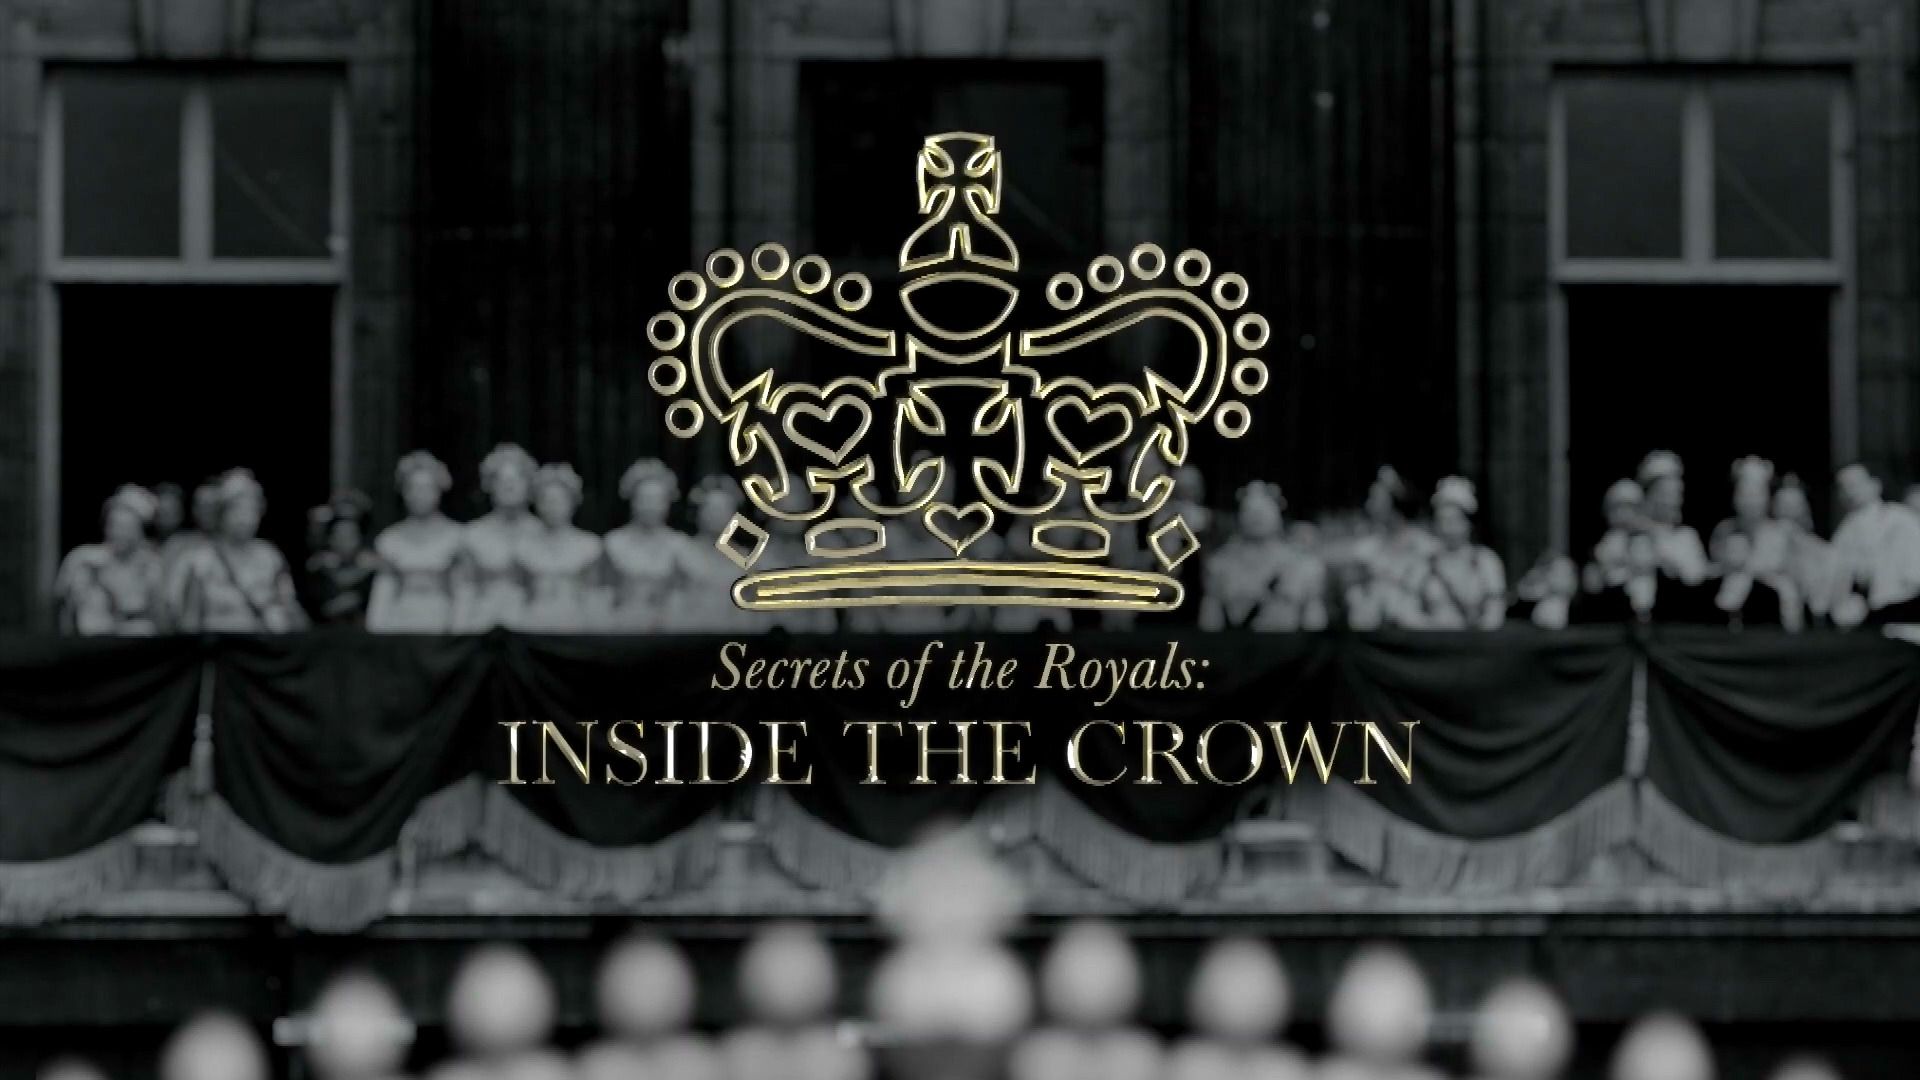 Show Inside the Crown: Secrets of the Royals